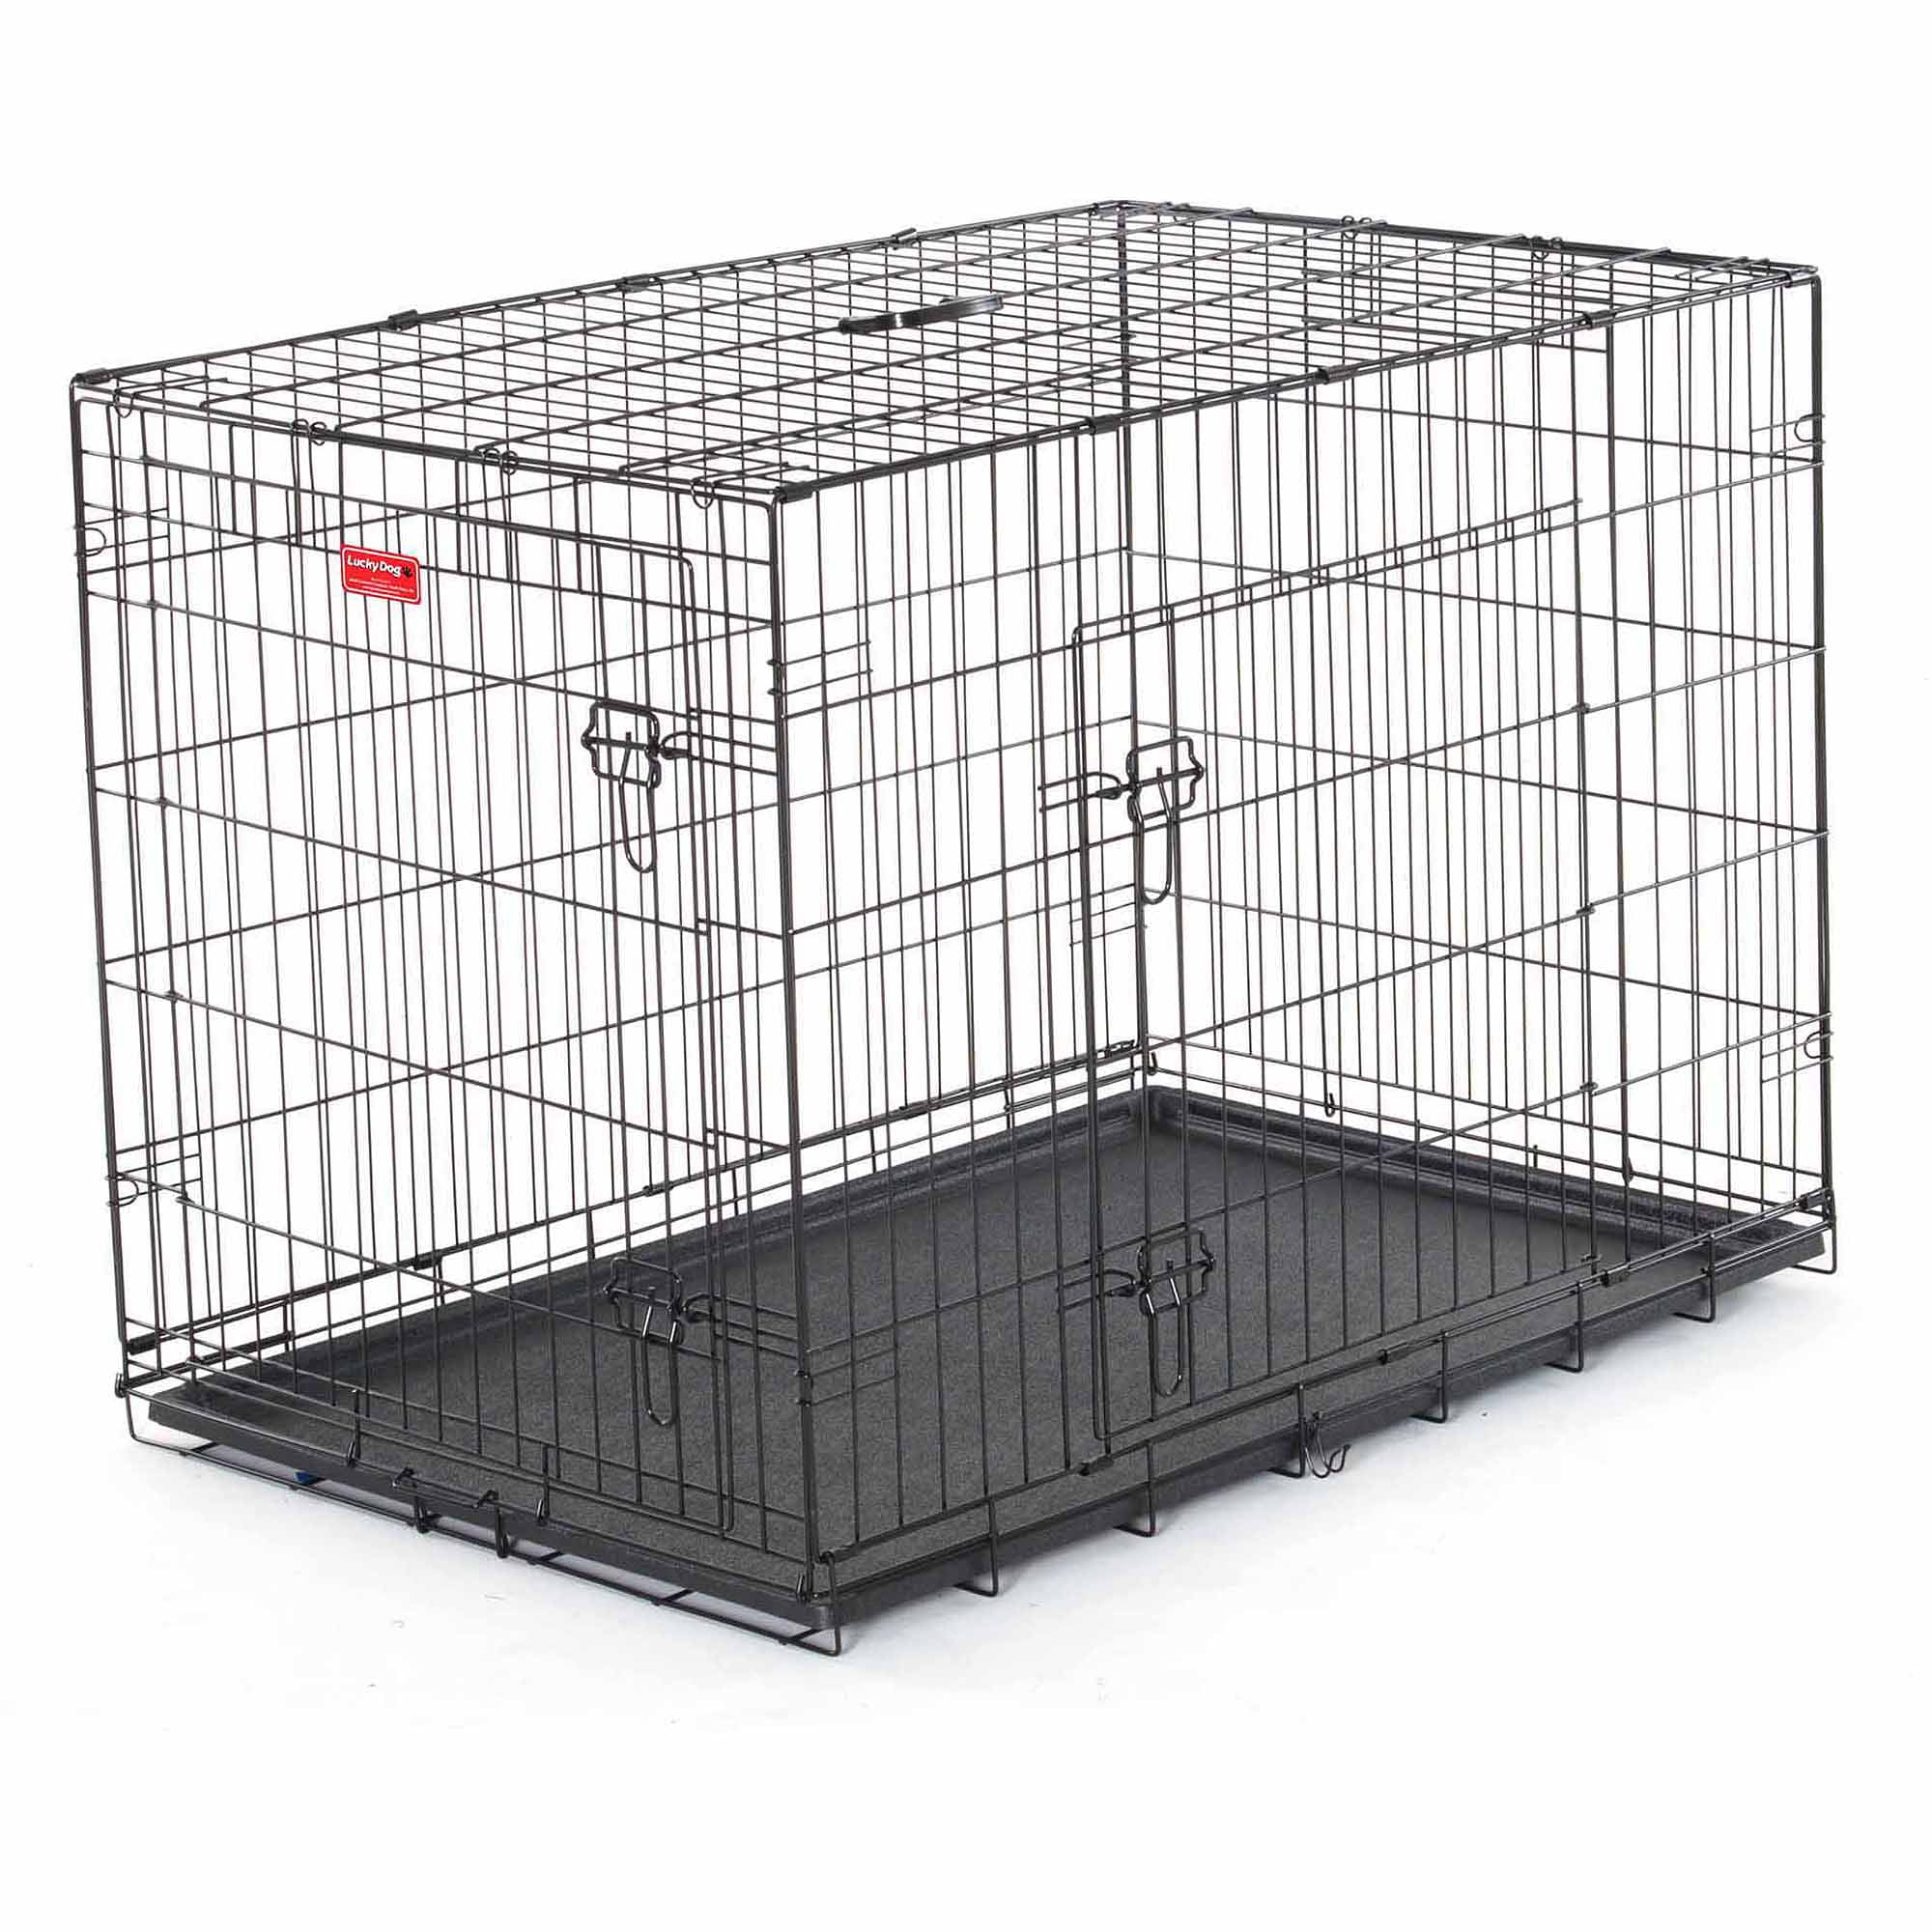 Dog Training Crate For Dogs Foldable Wire Security Cage Large 42"L x 28"W x 31"H 